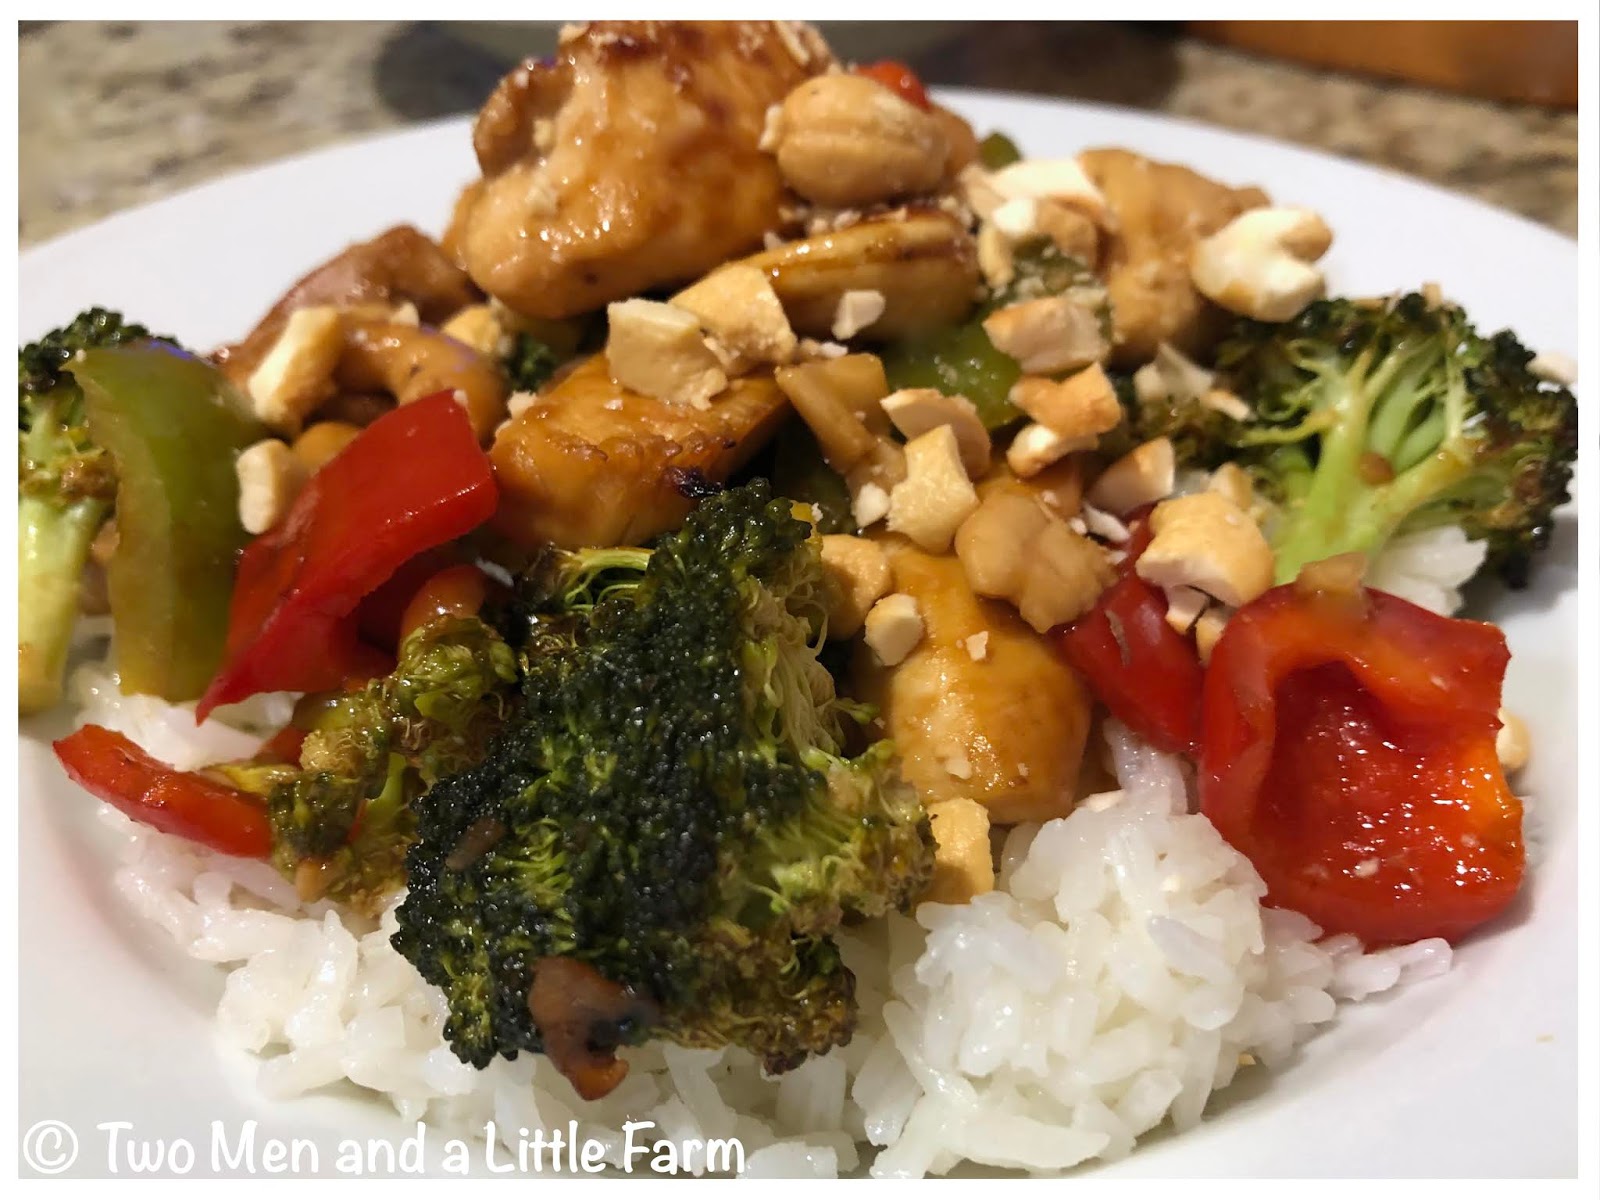 Two Men and a Little Farm: CASHEW CHICKEN AND VEGETABLES SHEET PAN RECIPE